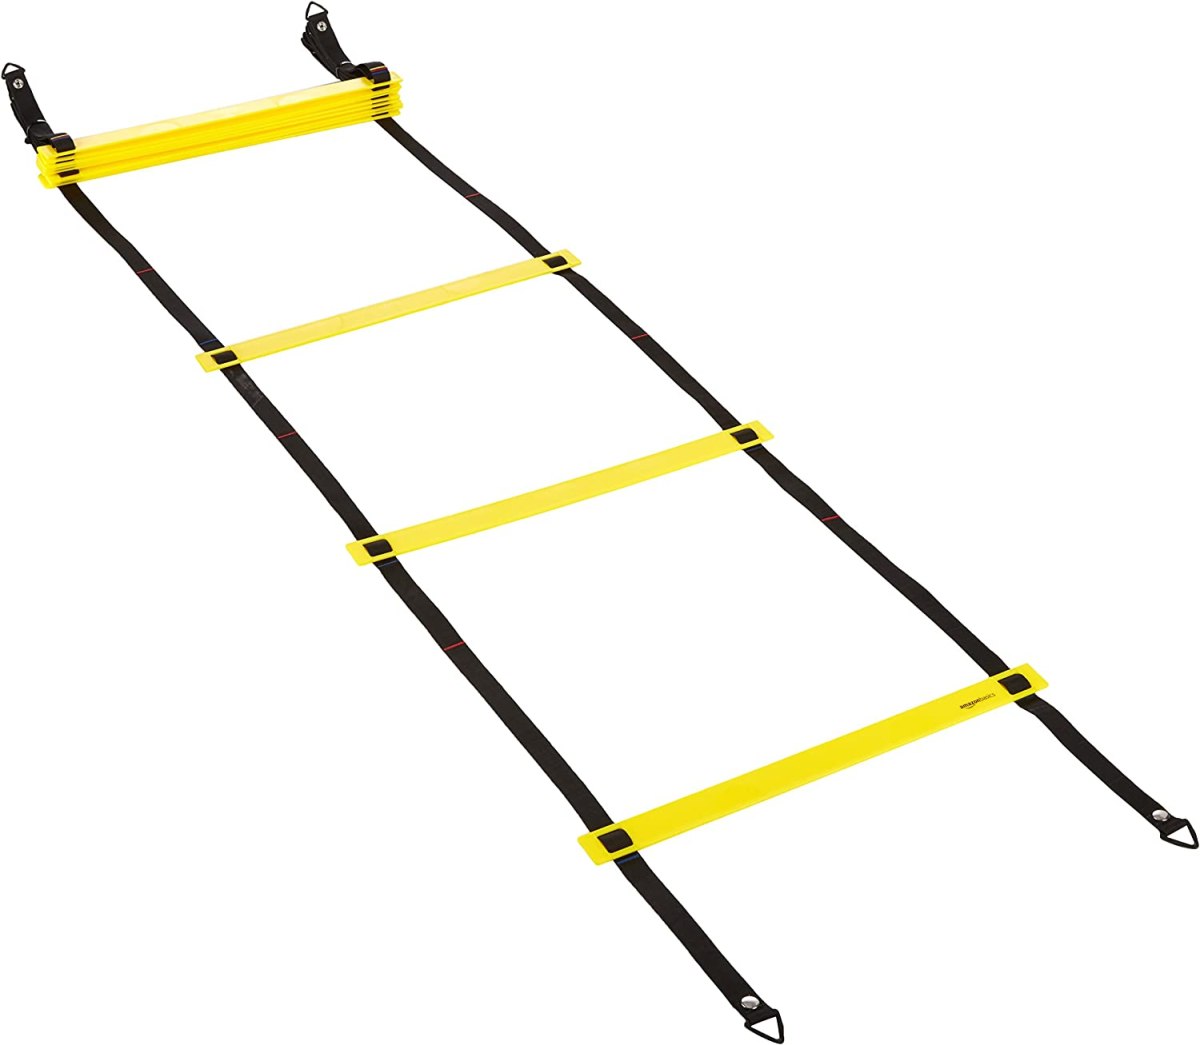 Using Agility ladders for Rugby Union Training